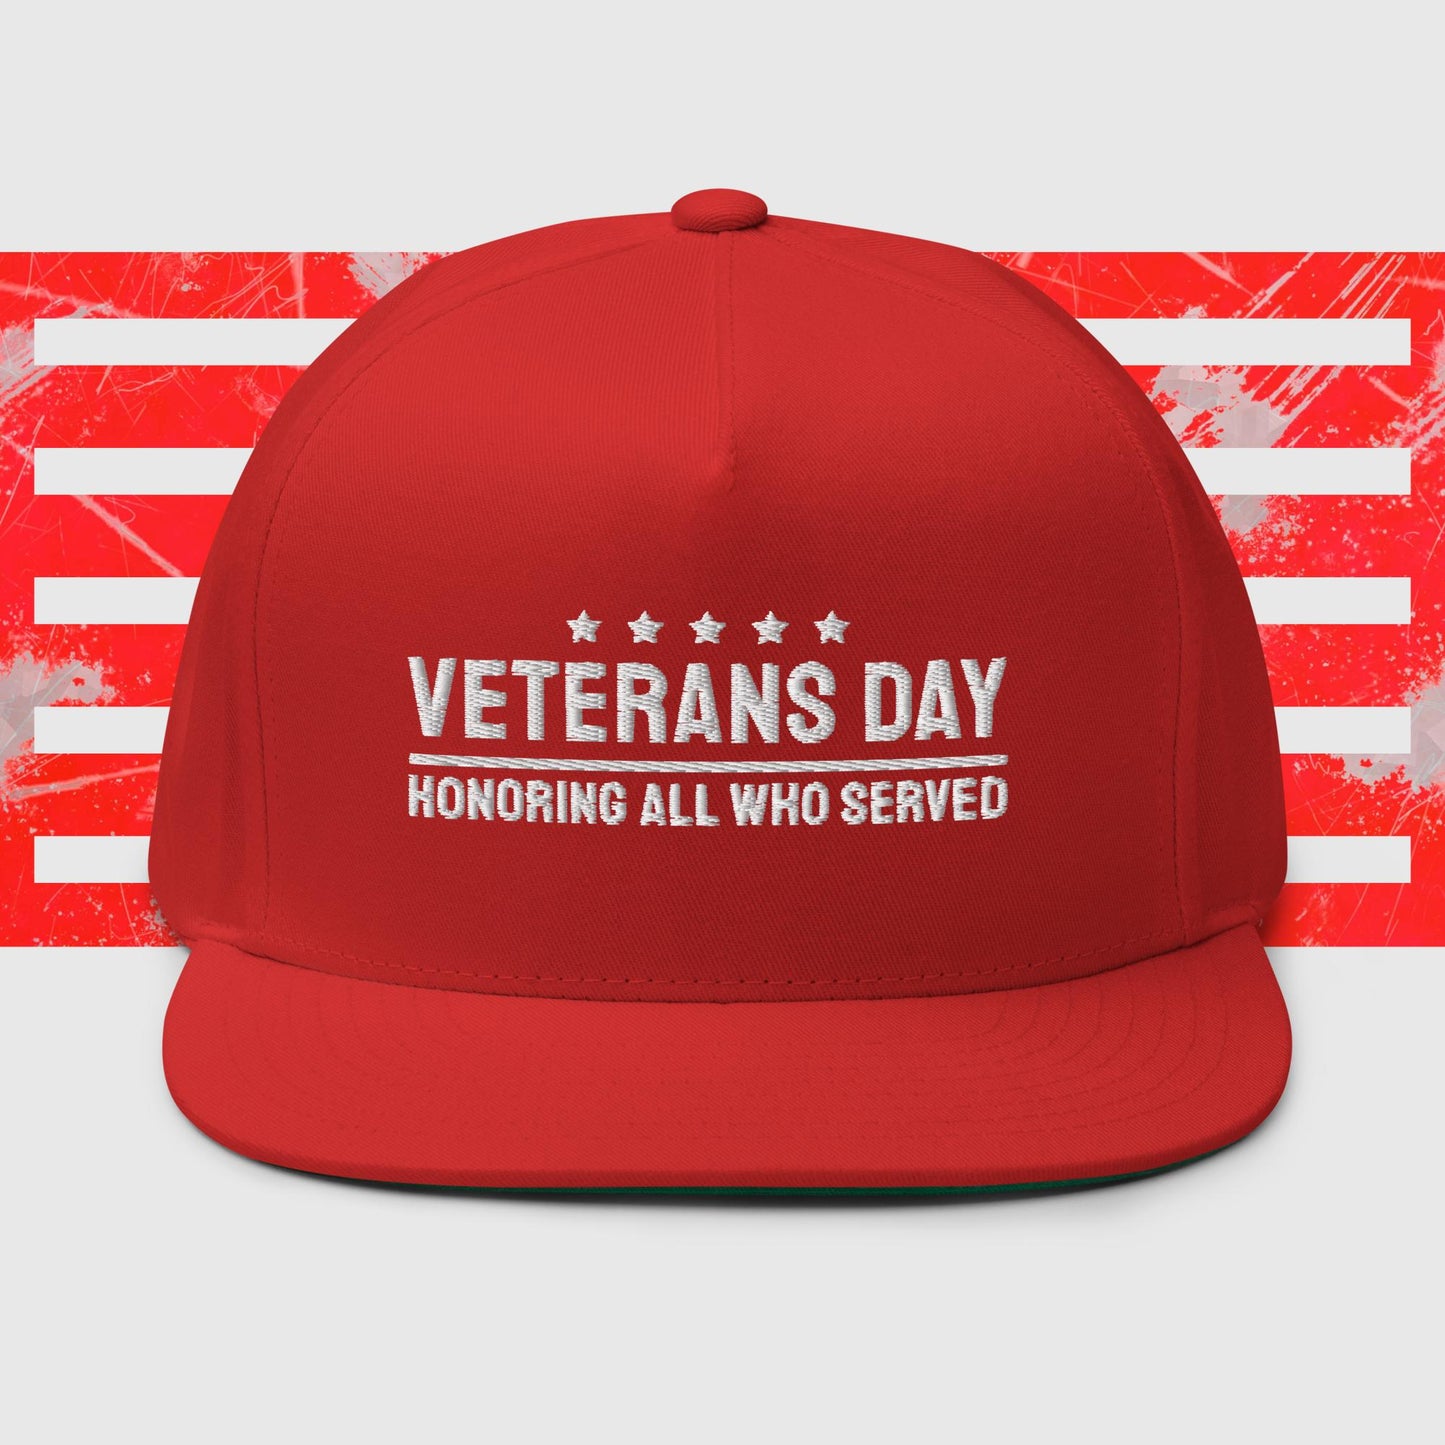 PATRIOTIC CAP VETERANS DAY HONORING ALL WHO SERVED RED FRONT - www.firstamericanstore.com